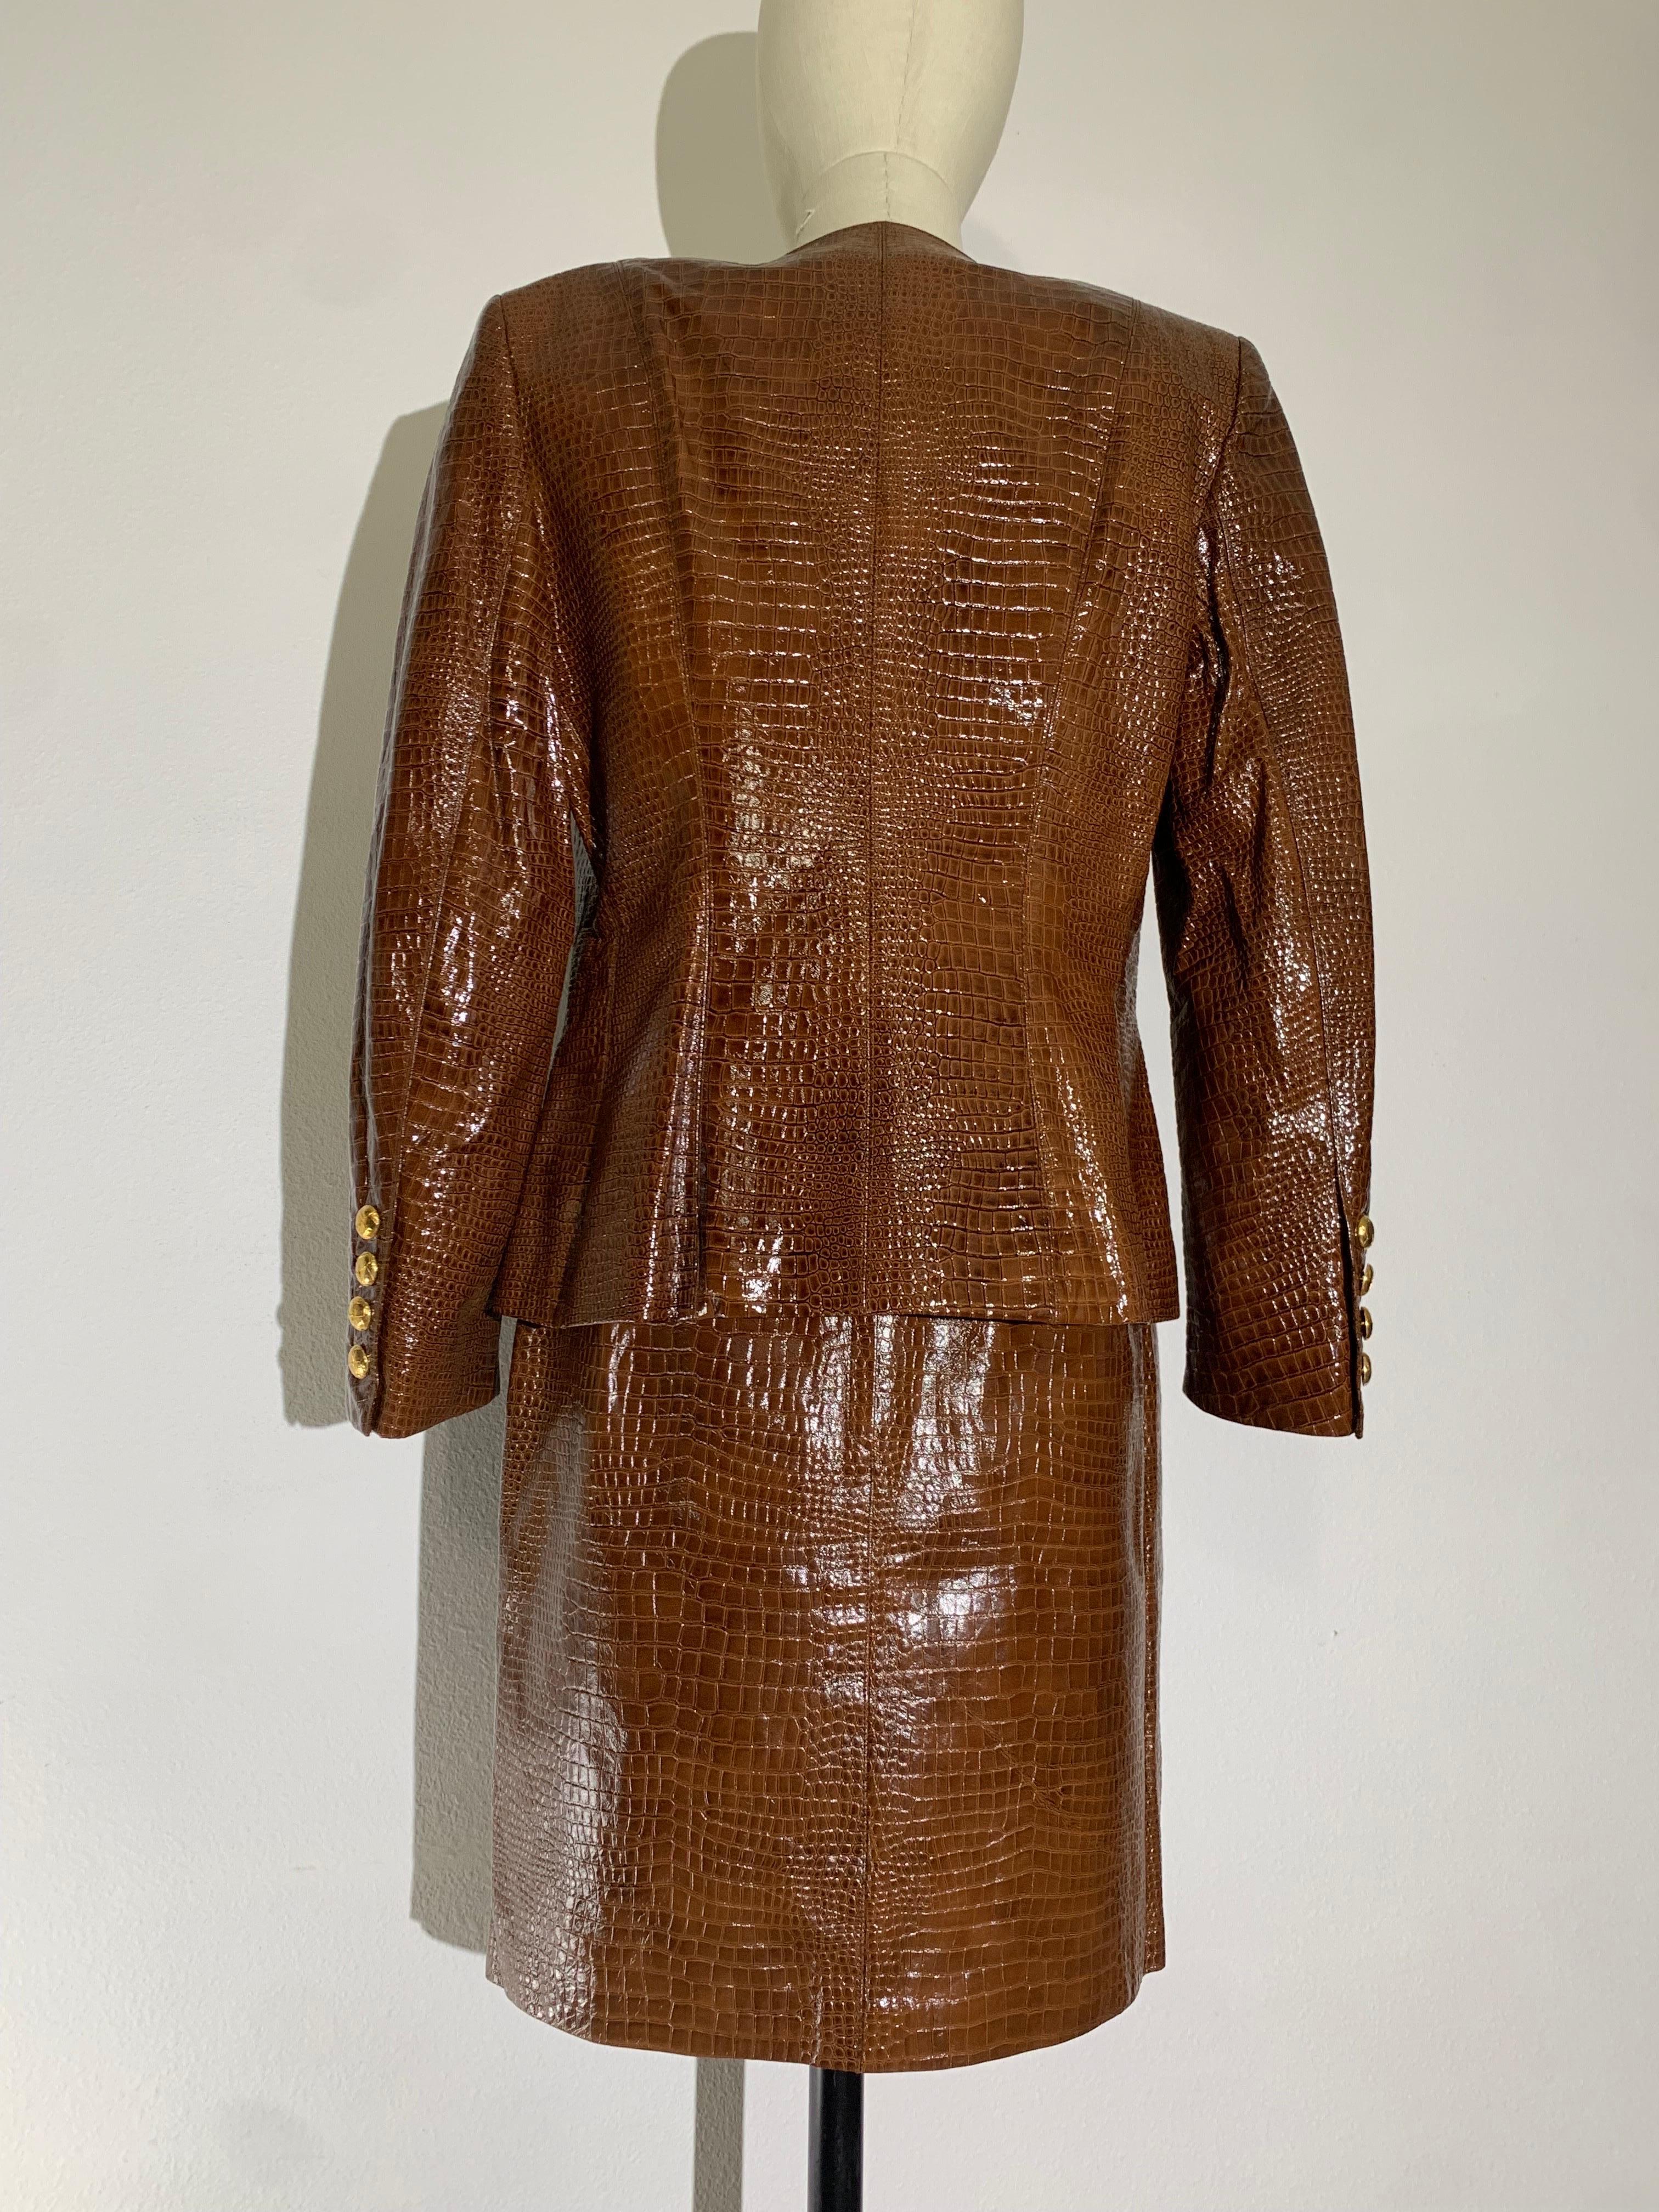 1980s Escada Brown Patent Leather Crocodile Embossed Skirt Suit w Gold Buttons For Sale 1